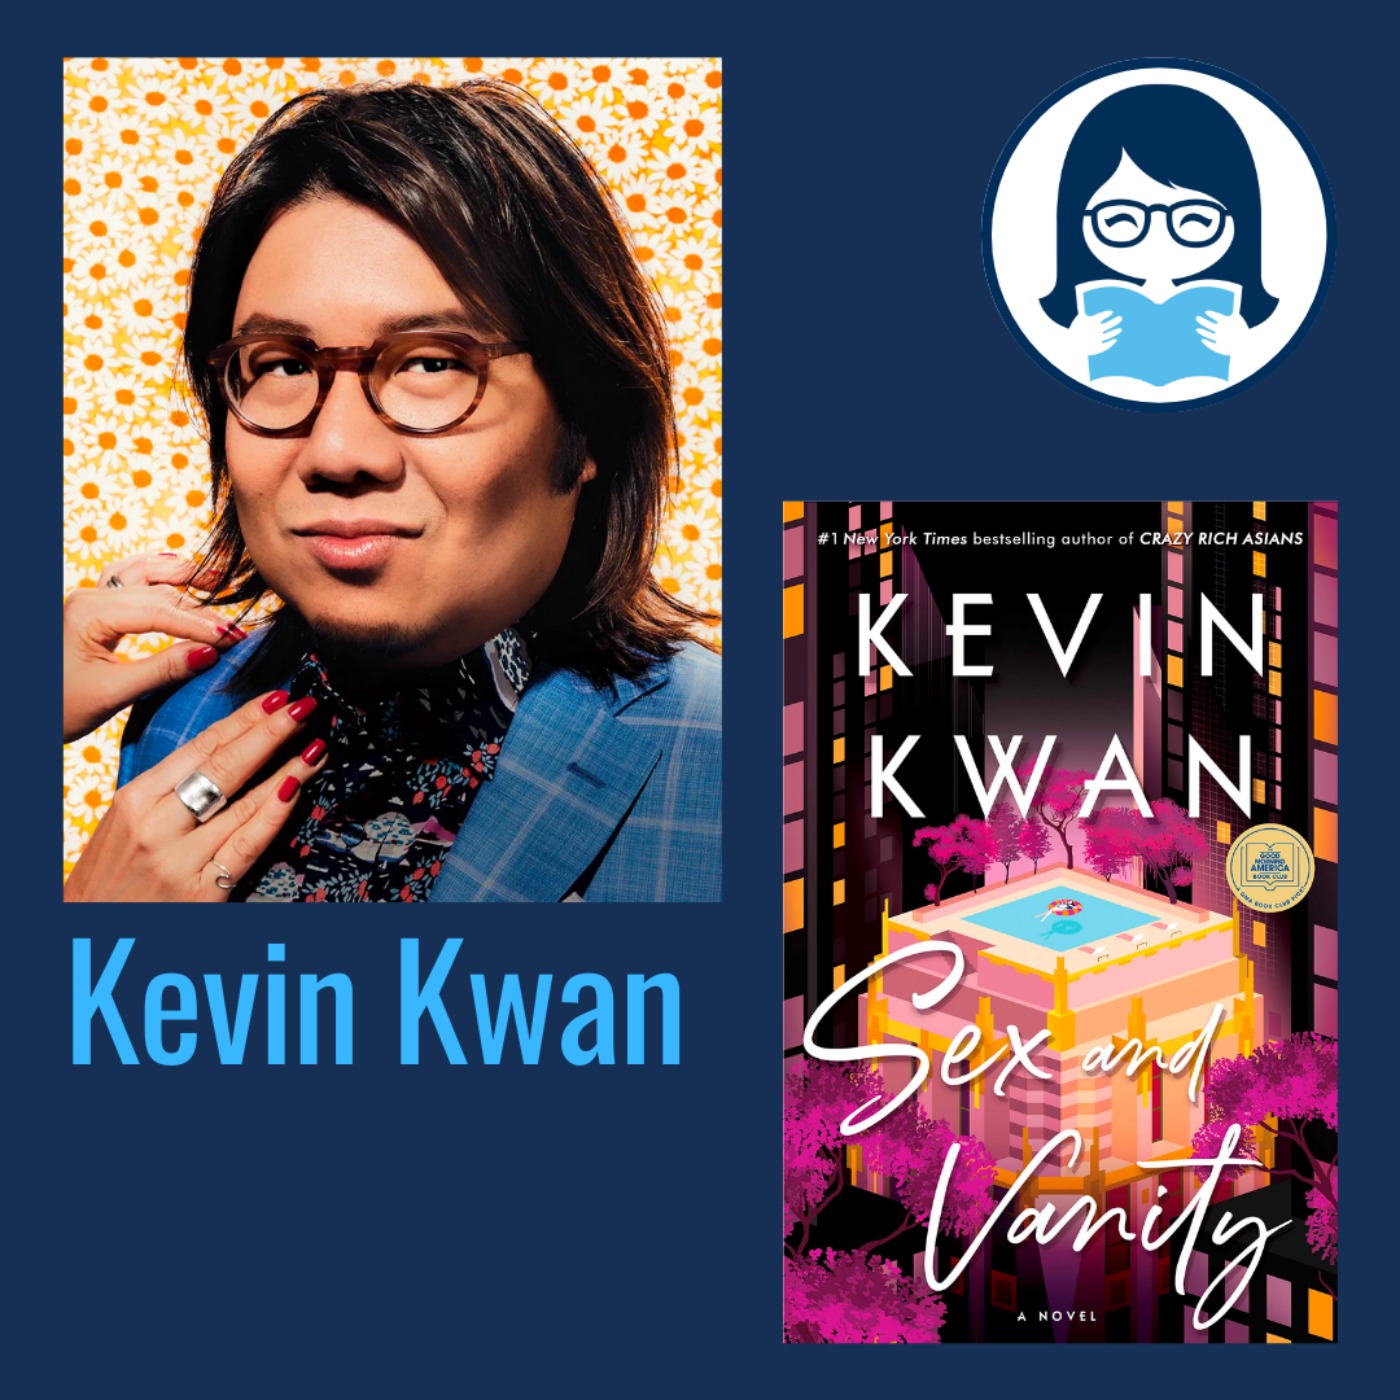 Kevin Kwan, SEX AND VANITY